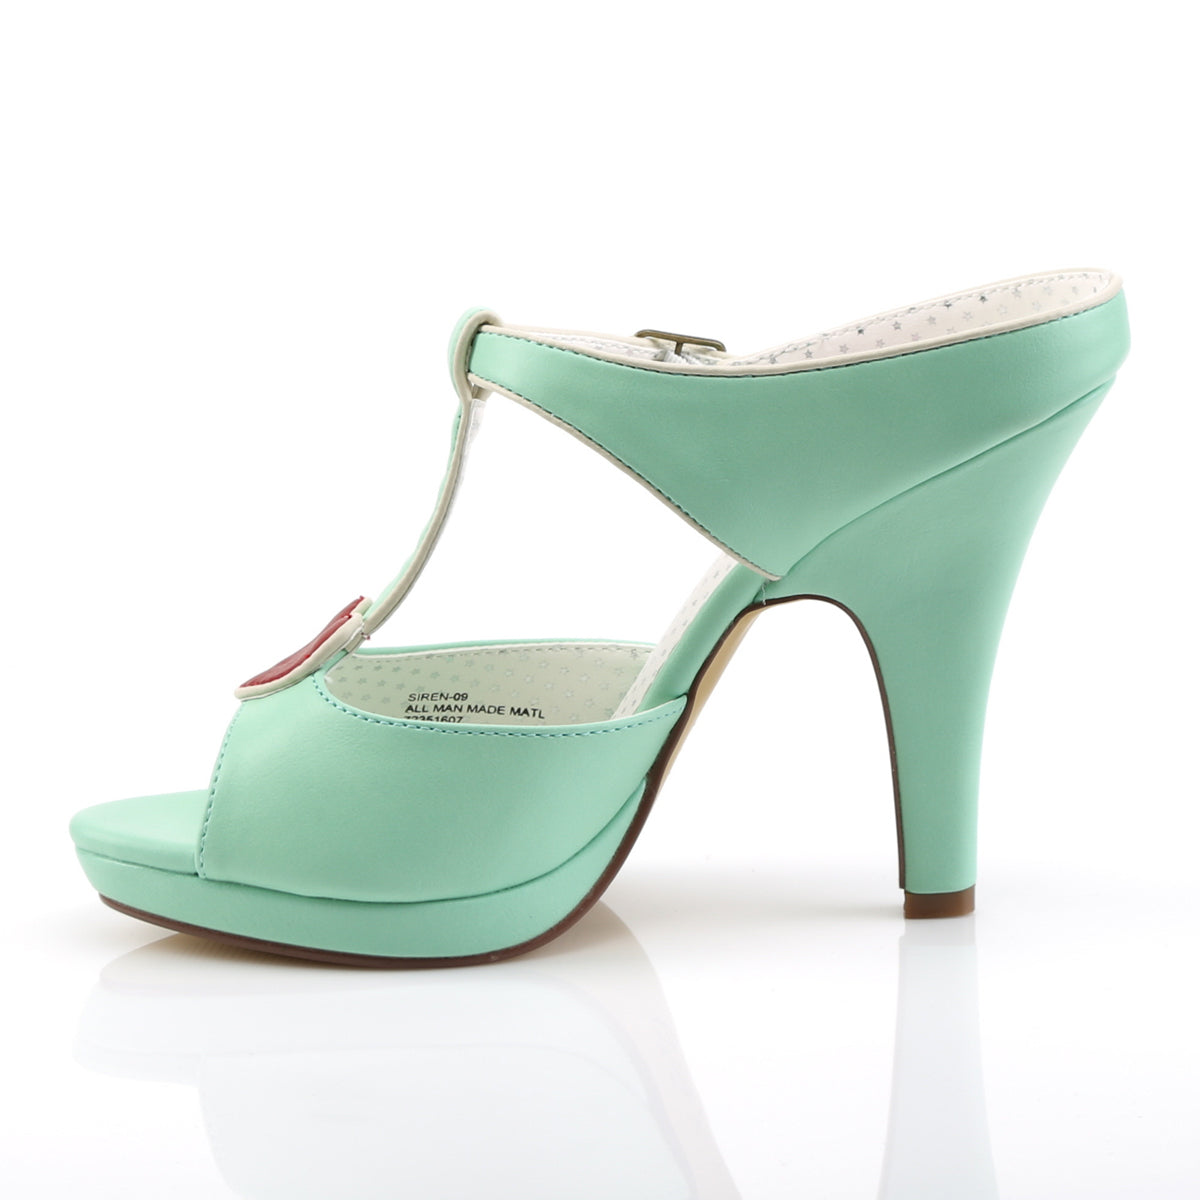 SIREN-09 Retro Glamour Pin Up Couture Platforms Mint Faux Leather